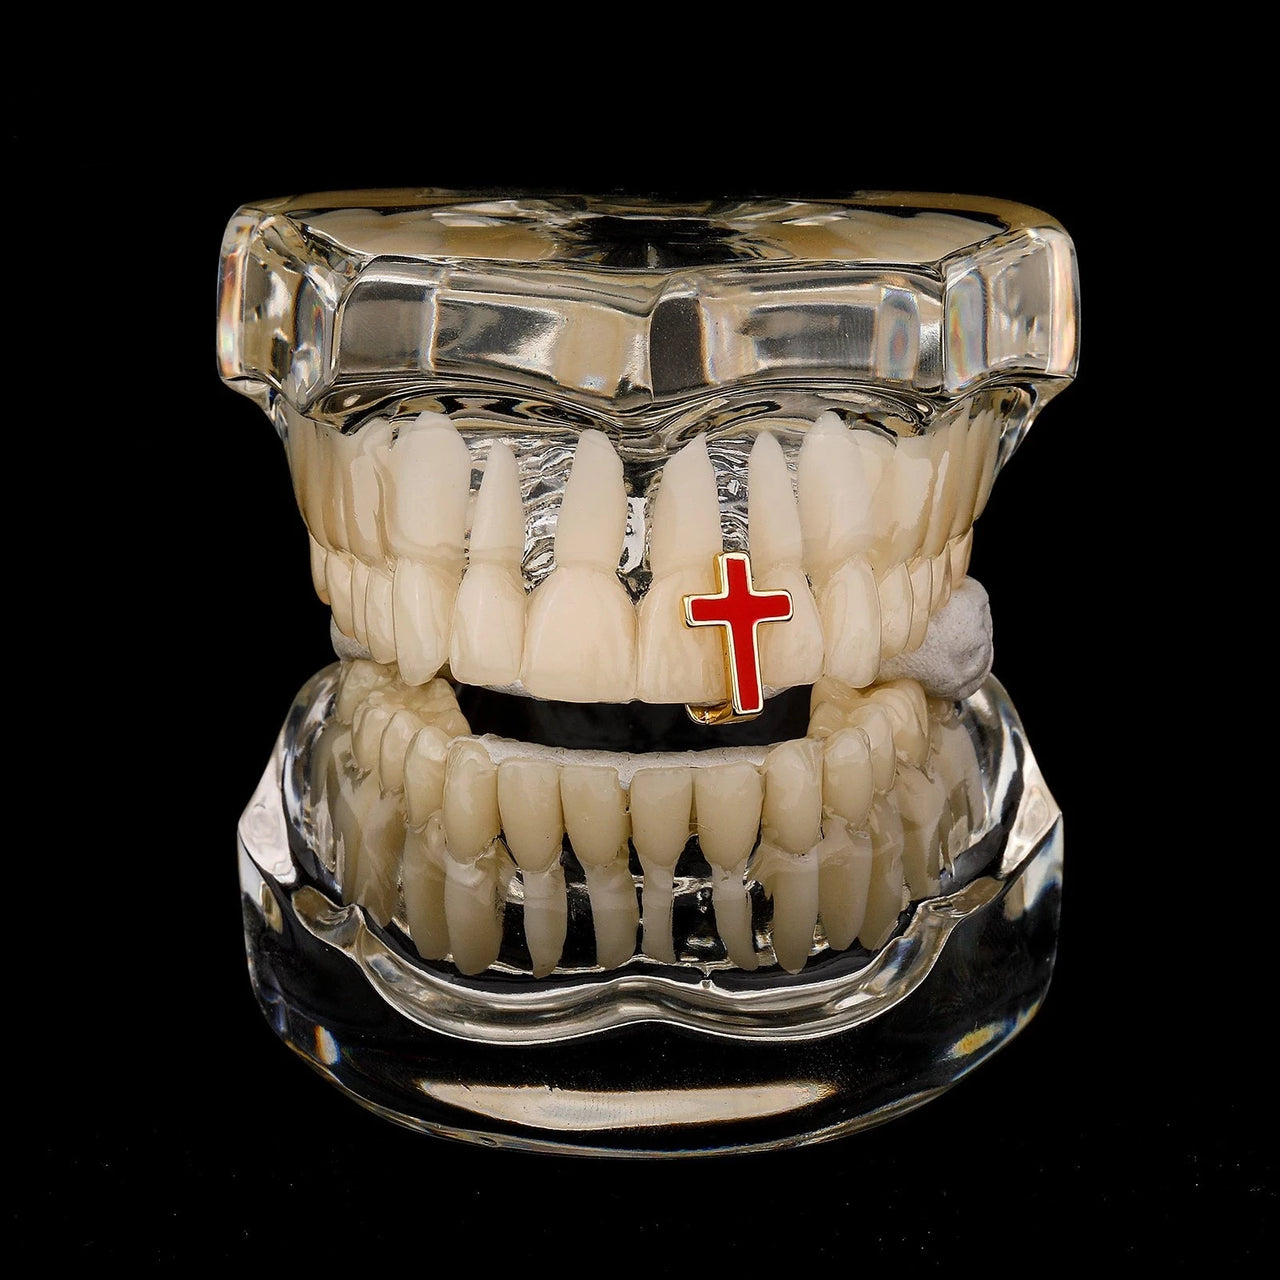 Enamel Cross Single Tooth Grillz - Different Drips